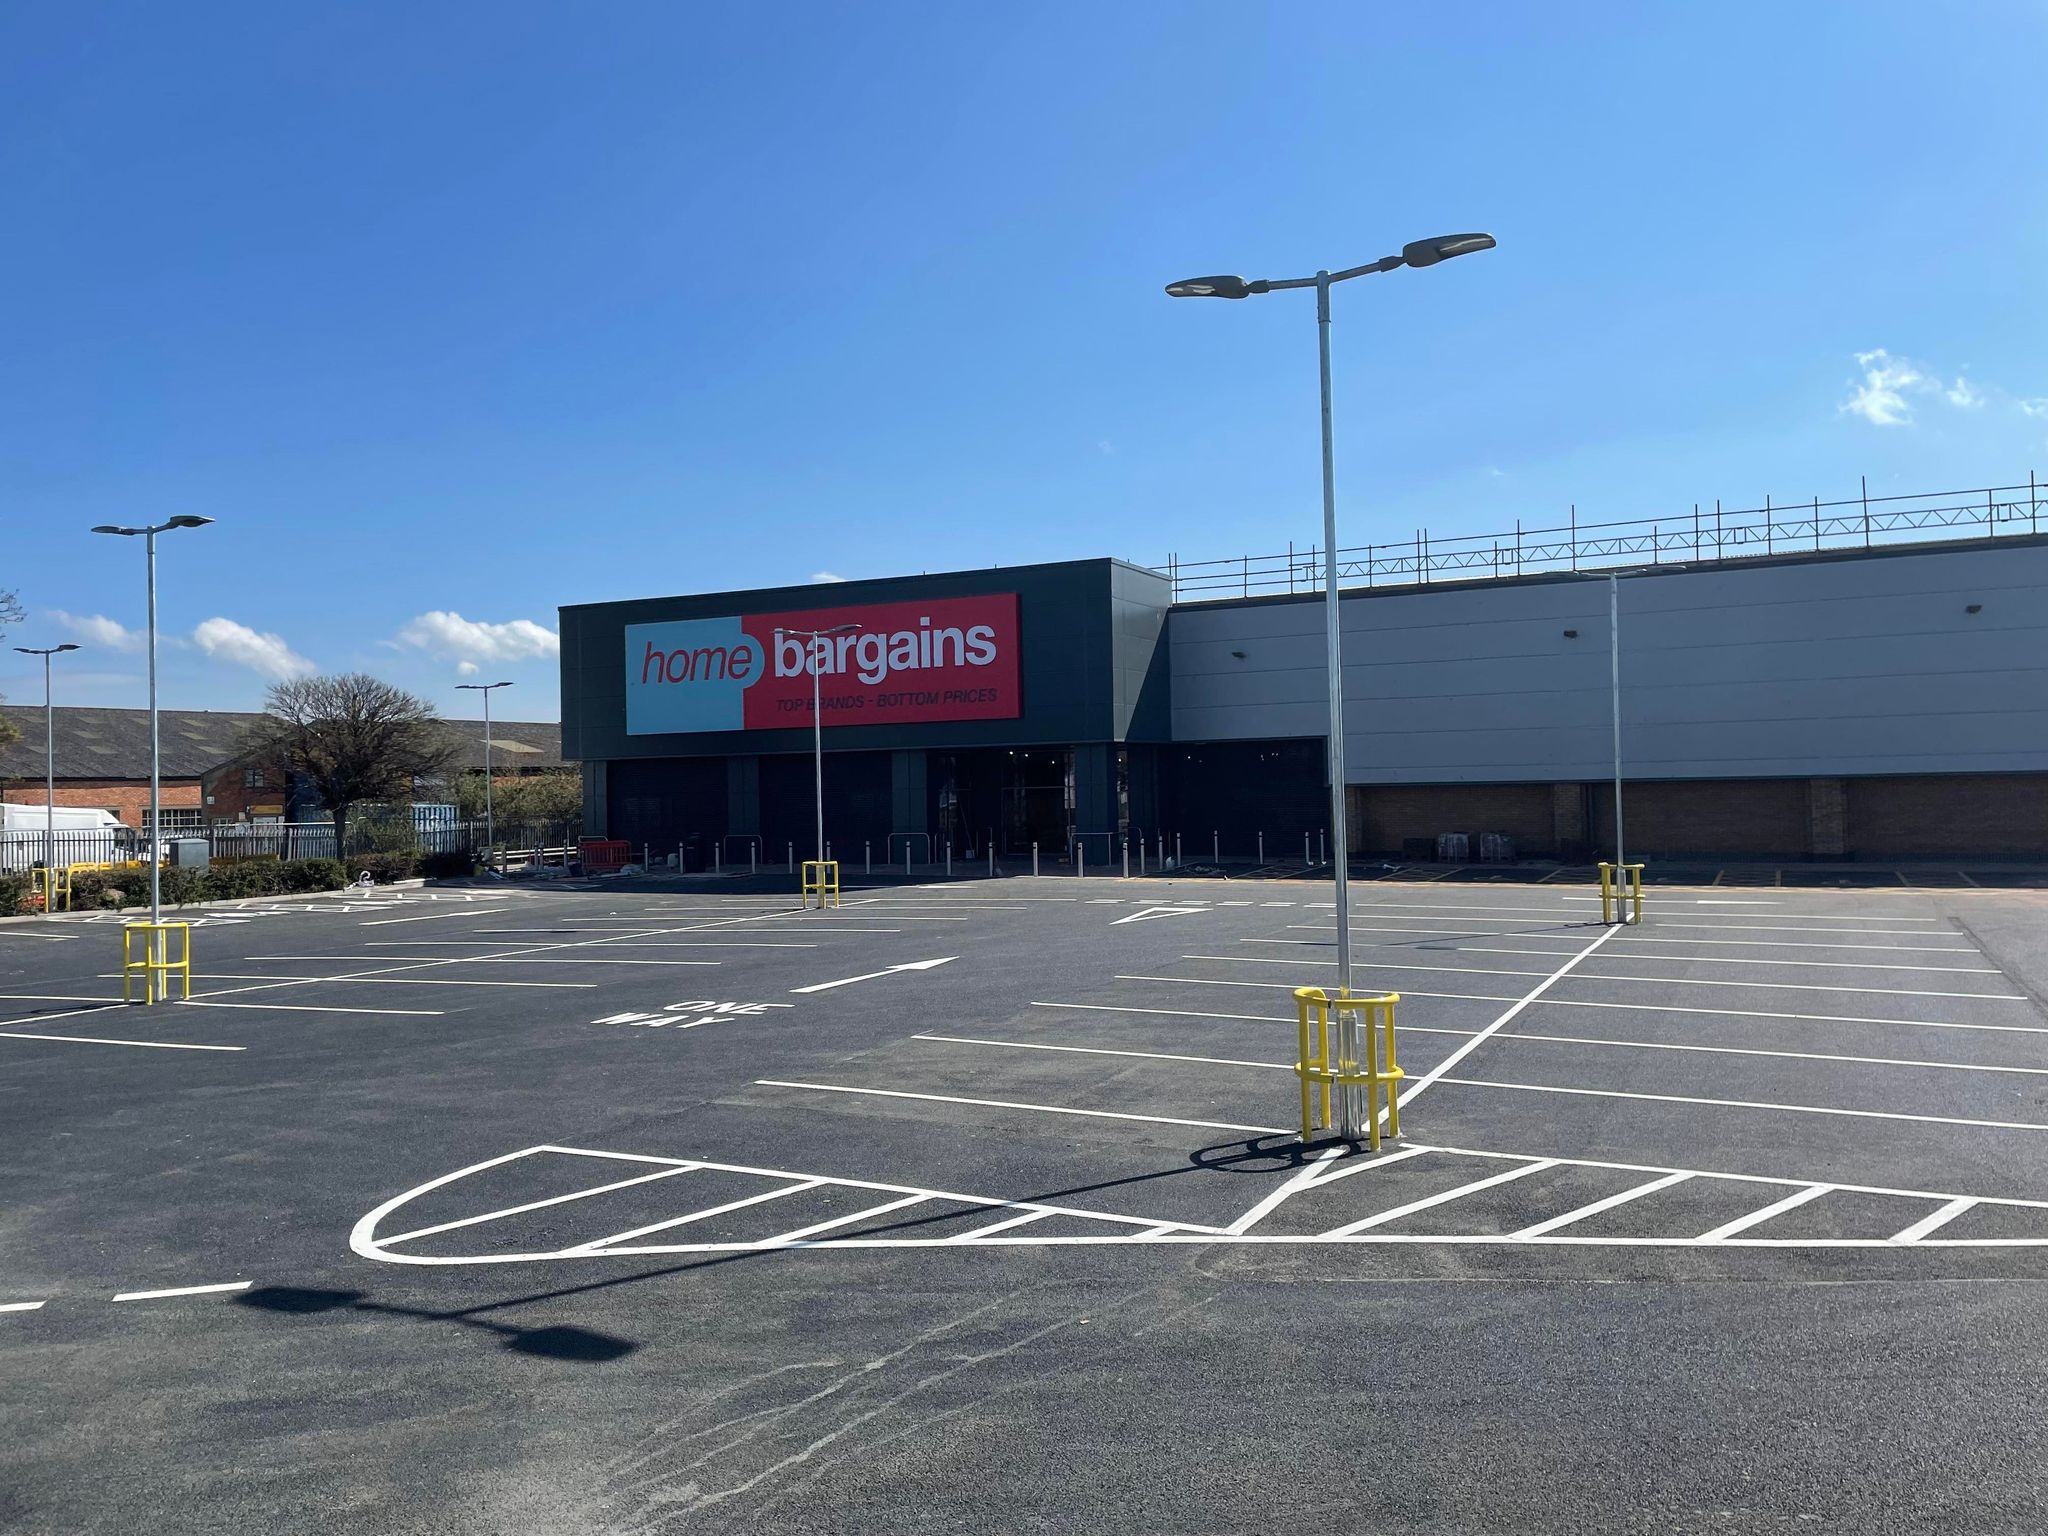 NEWS | Everything you need to know about the recently refurbished Home Bargains store that will open next month